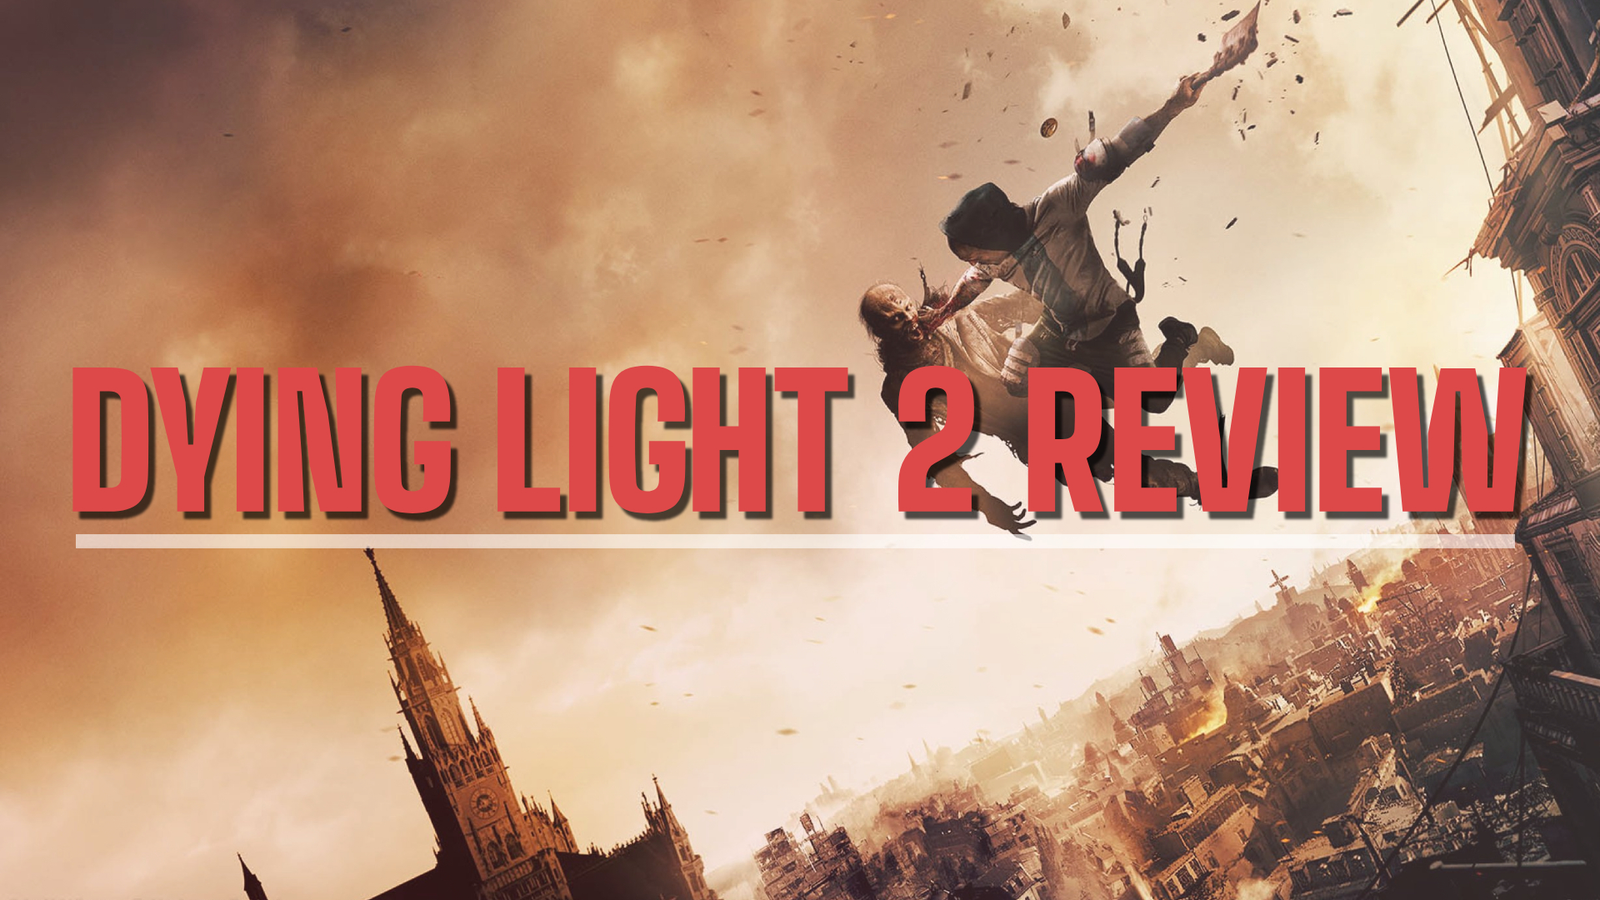 Is Dying Light 2 as bad as the metacritic user reviews? : r/gaming